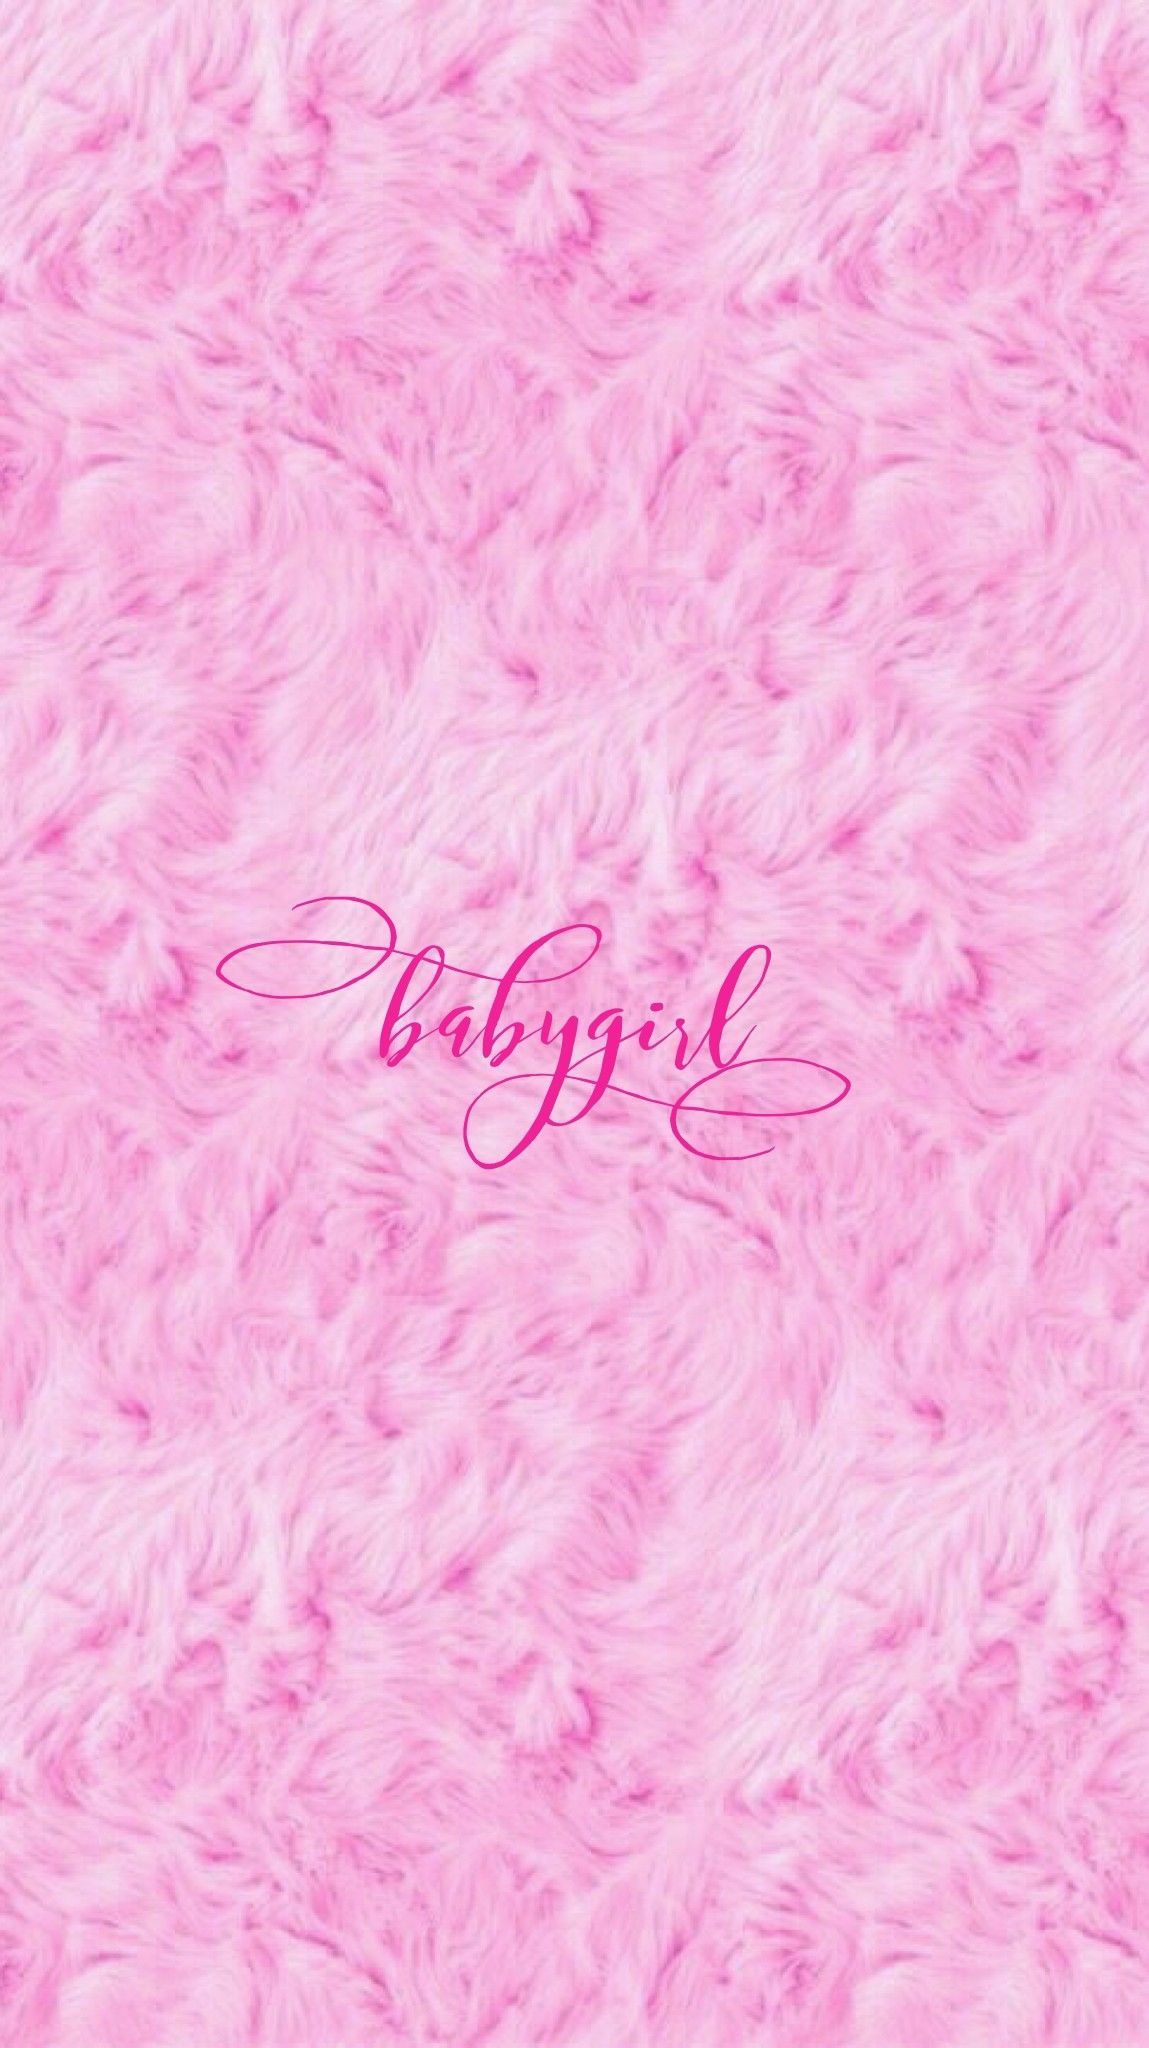 A pink fluffy background with the word babygirl in the middle - Barbie